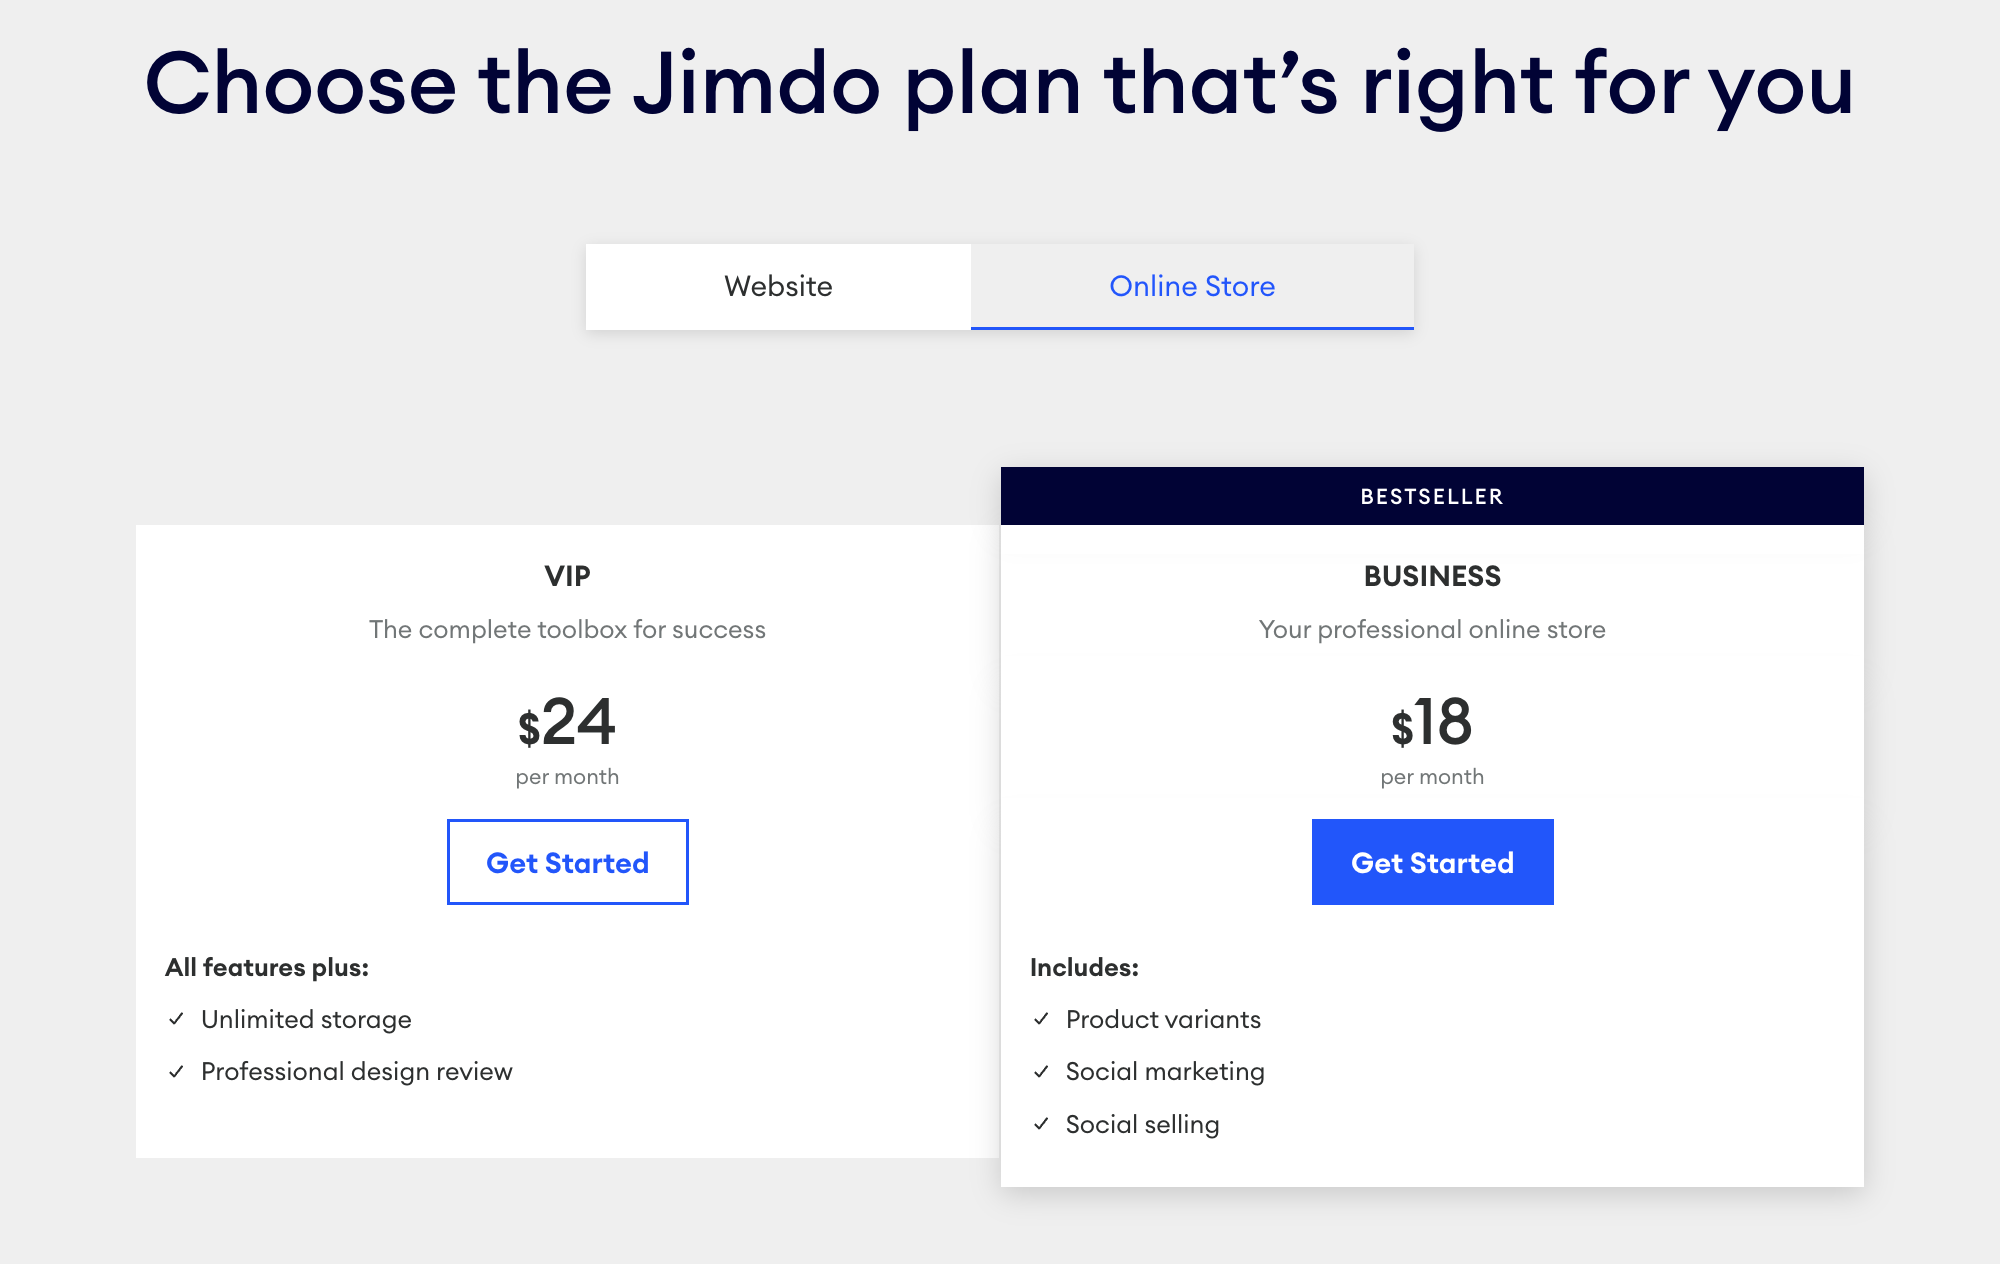 Jimdo's pricing for online store services